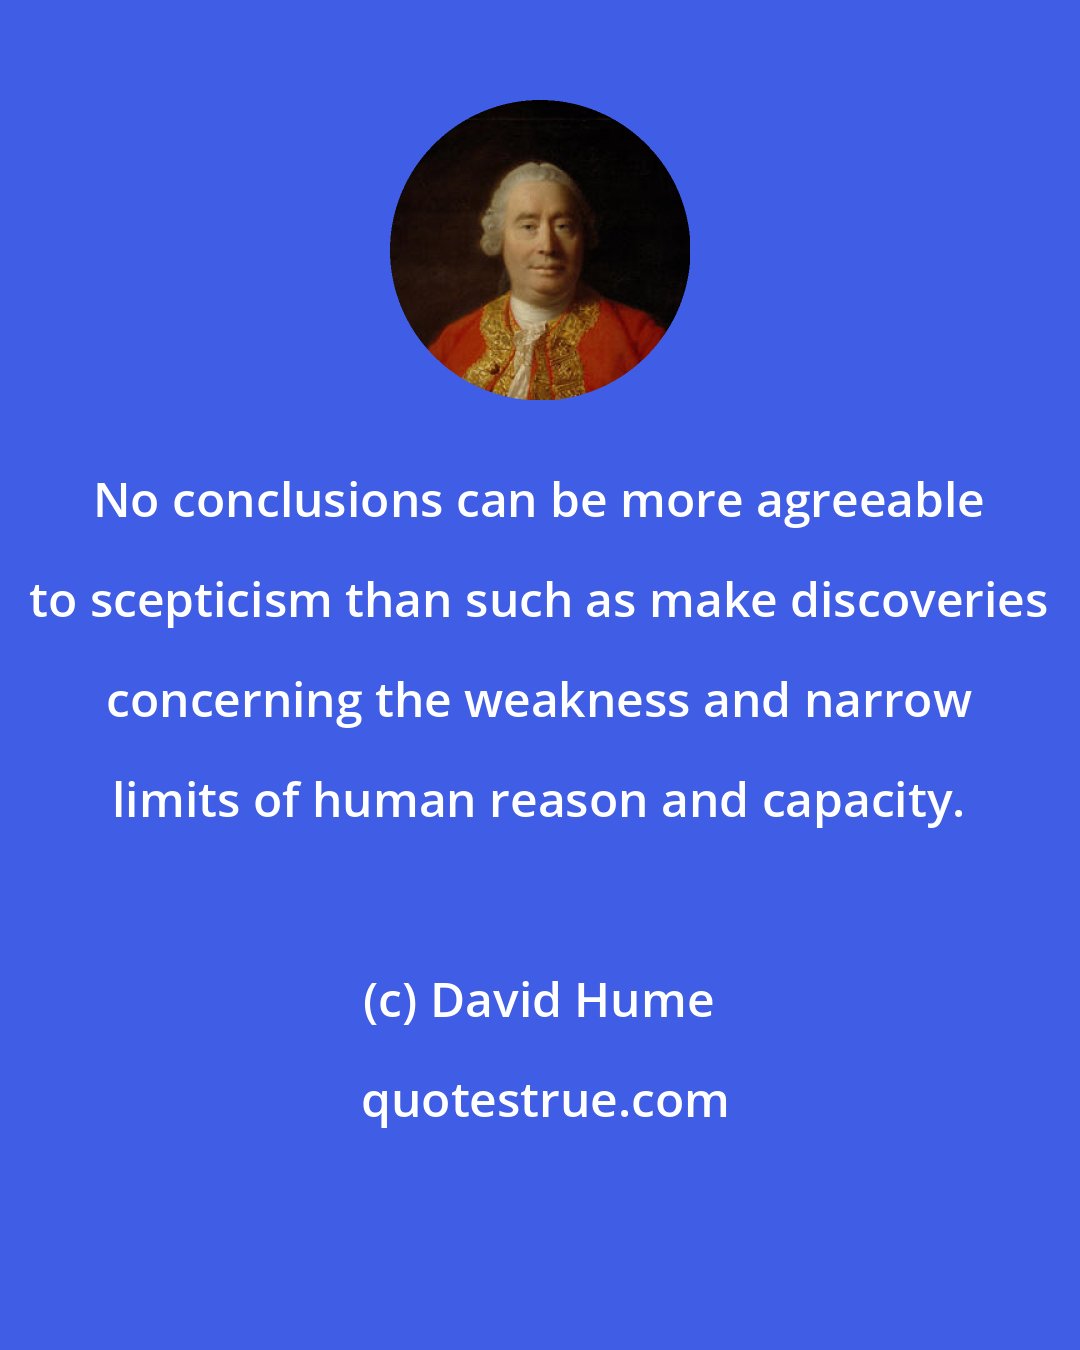 David Hume: No conclusions can be more agreeable to scepticism than such as make discoveries concerning the weakness and narrow limits of human reason and capacity.